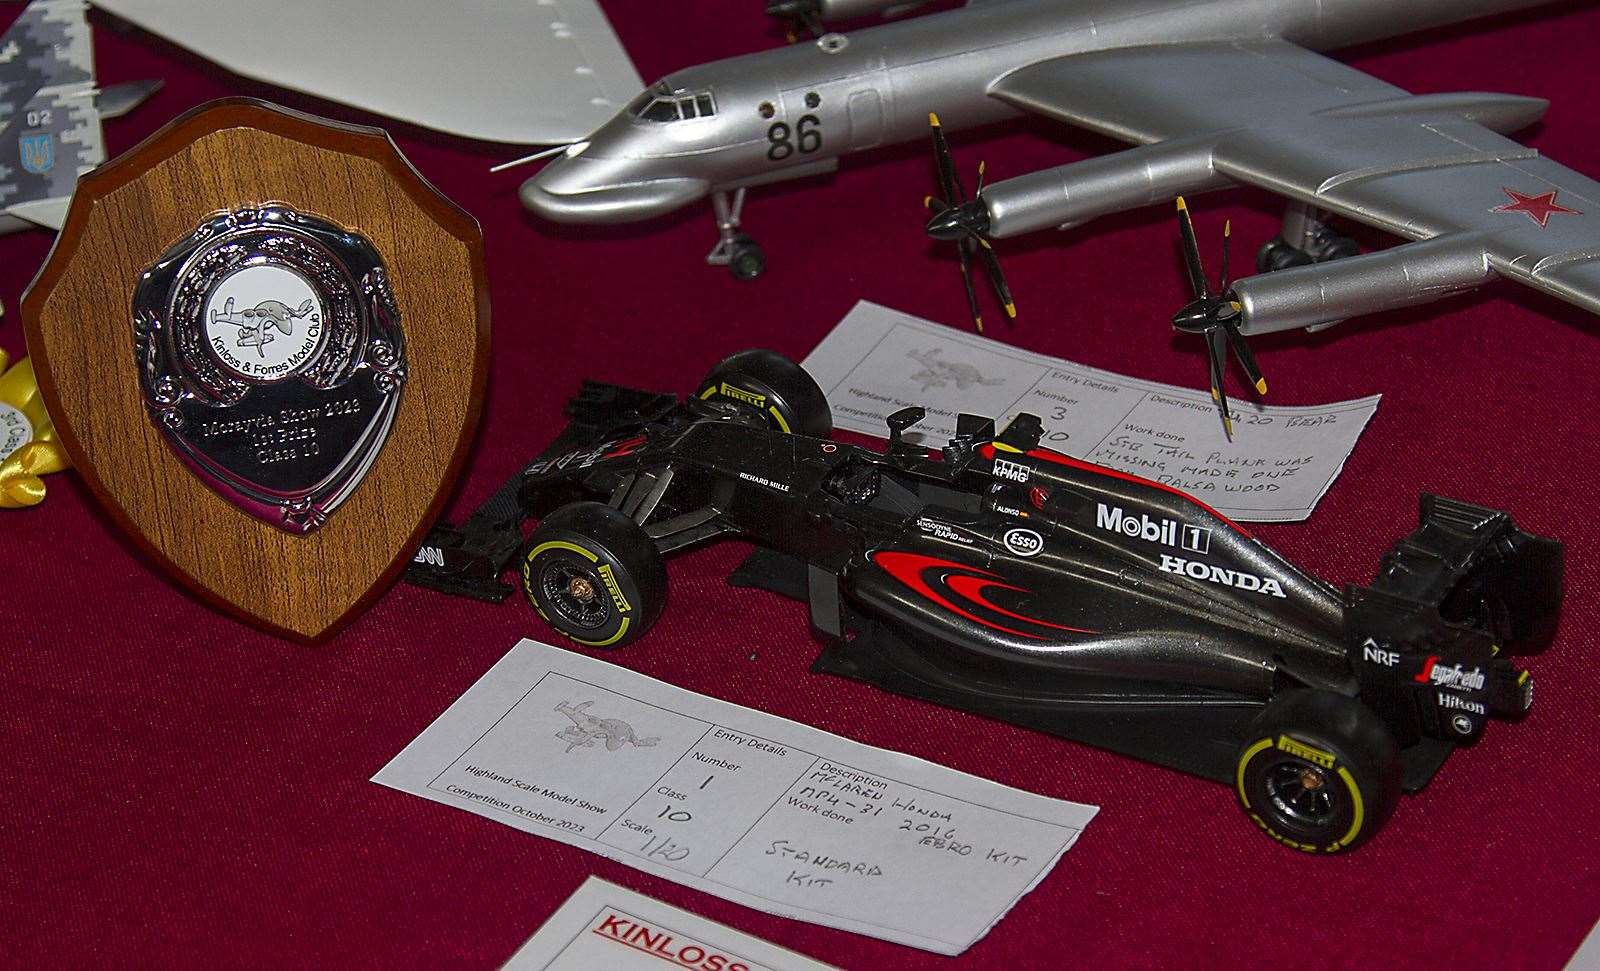 The McLaren Honda F1 car which won the Junior Class for local Forres lad Dylan Fraser.